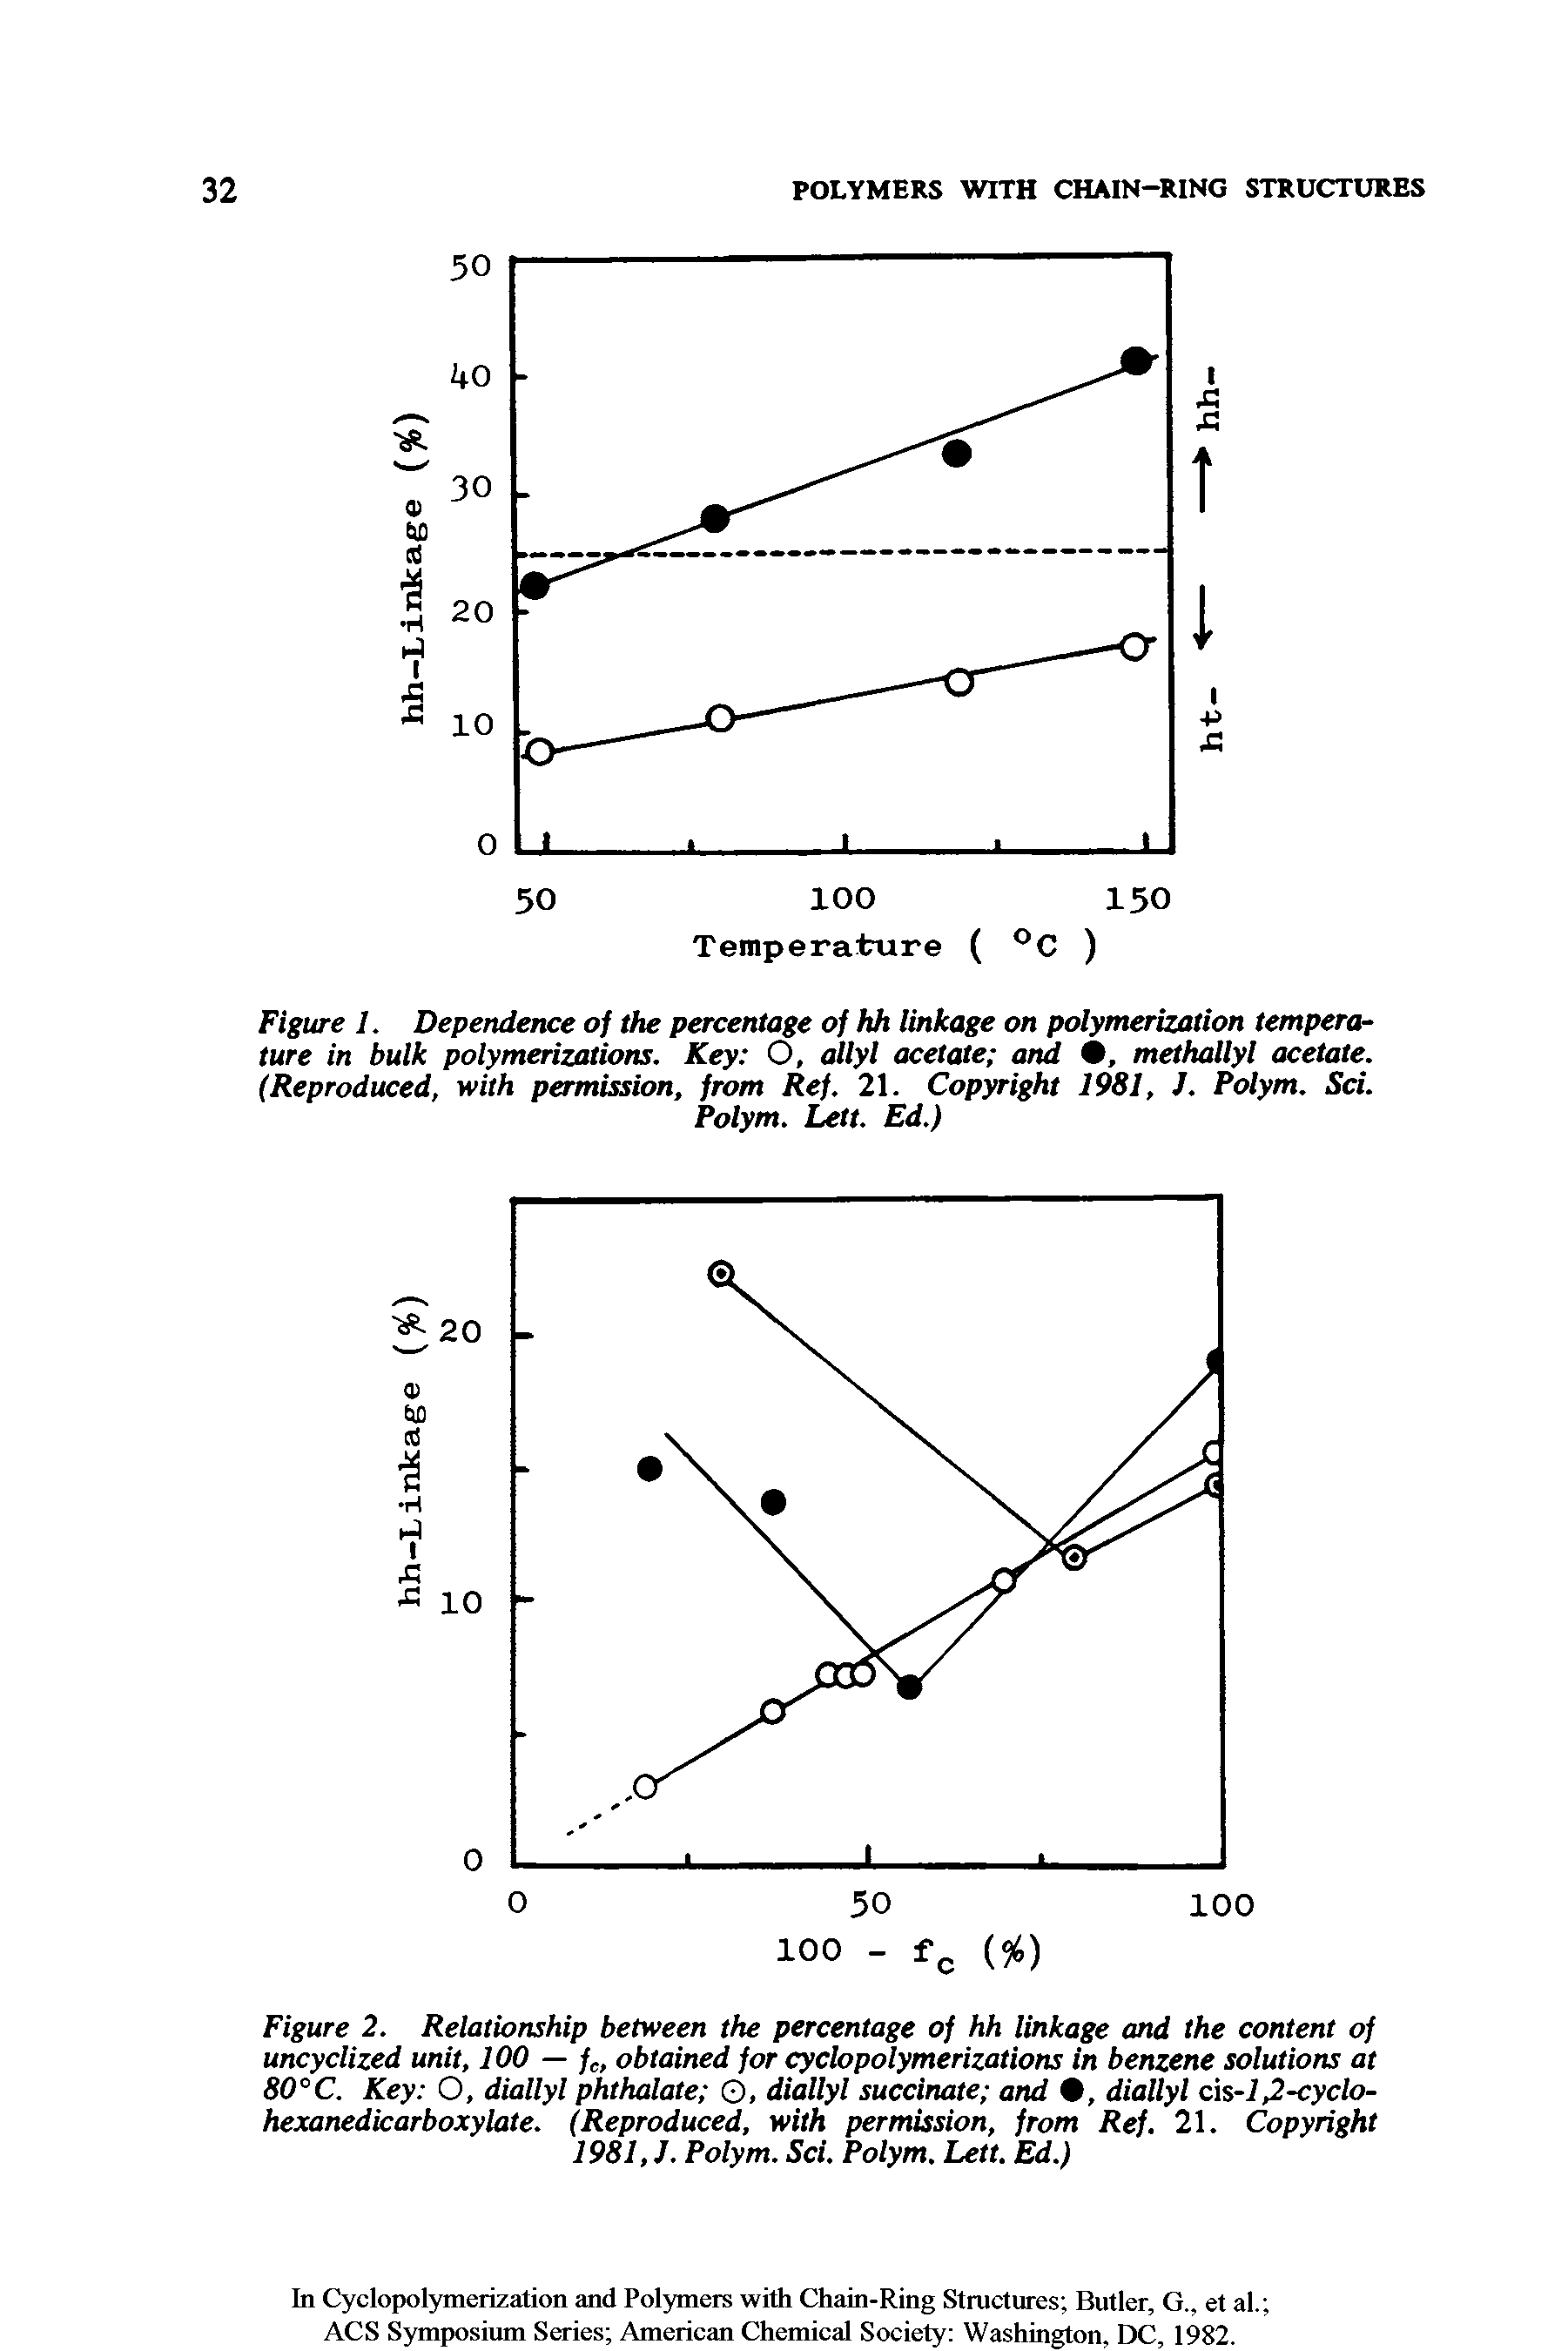 Figure 2. Relationship between the percentage of hh linkage and the content of uncyclized unit, 100 — fe, obtained for cyclopolymerizations in benzene solutions at 80°C. Key O, diallyl phthalate O, diallyl succinate and , diallyl cis-i 2-cyclo-hexanedicarboxylate. (Reproduced, with permission, from Ref. 21. Copyright 1981, J. Polym. Sci. Polym. Lett. Ed.)...